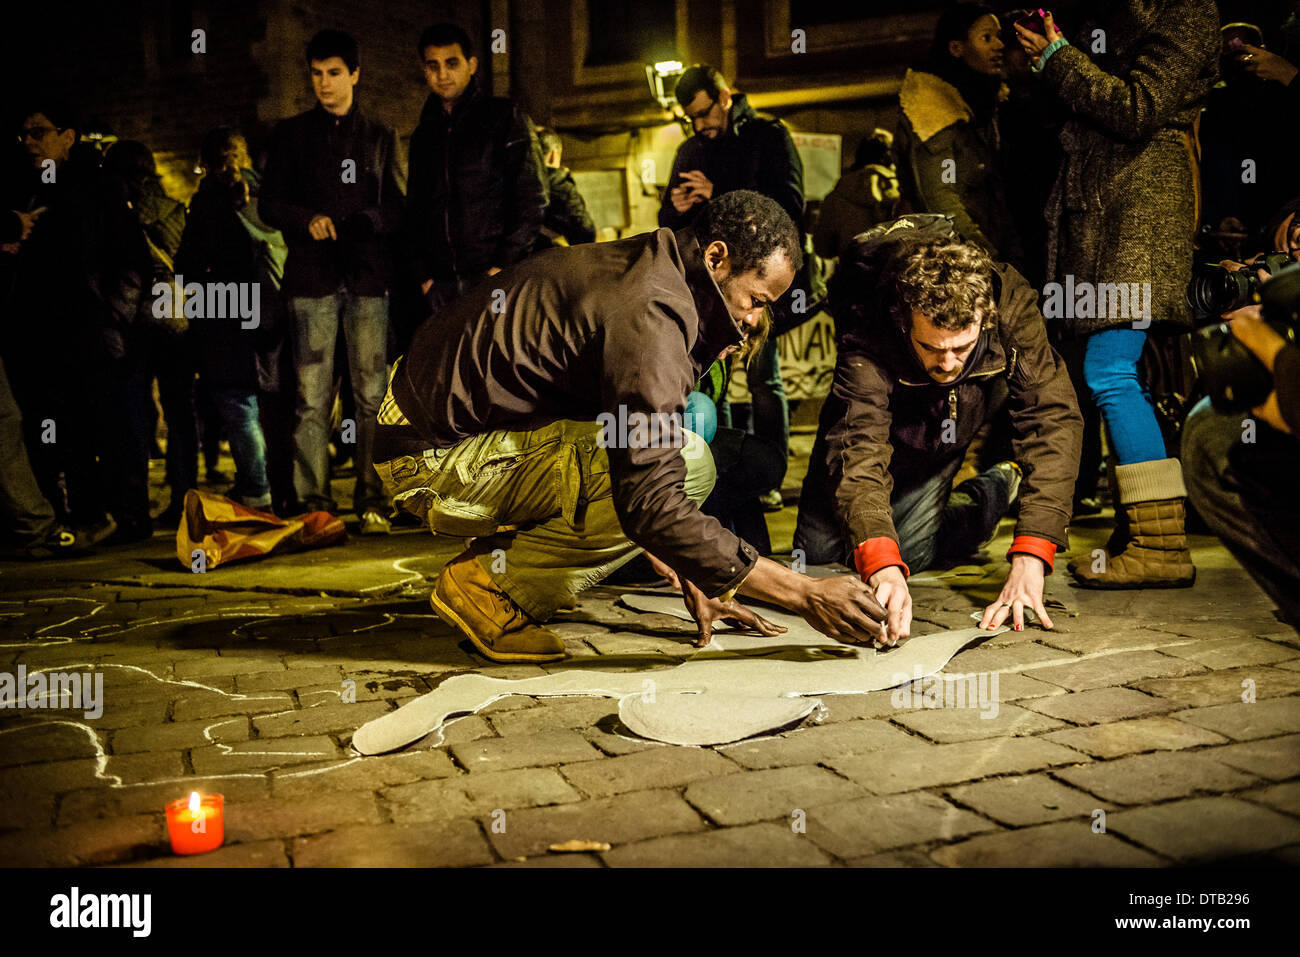 Barcelona, Spain. February 12th, 2014: Immigrant activists paint symbolic chalk outlines of dead bodies for the recent victims of undocumented immigrants at the Spanish border of Ceuta. Stock Photo